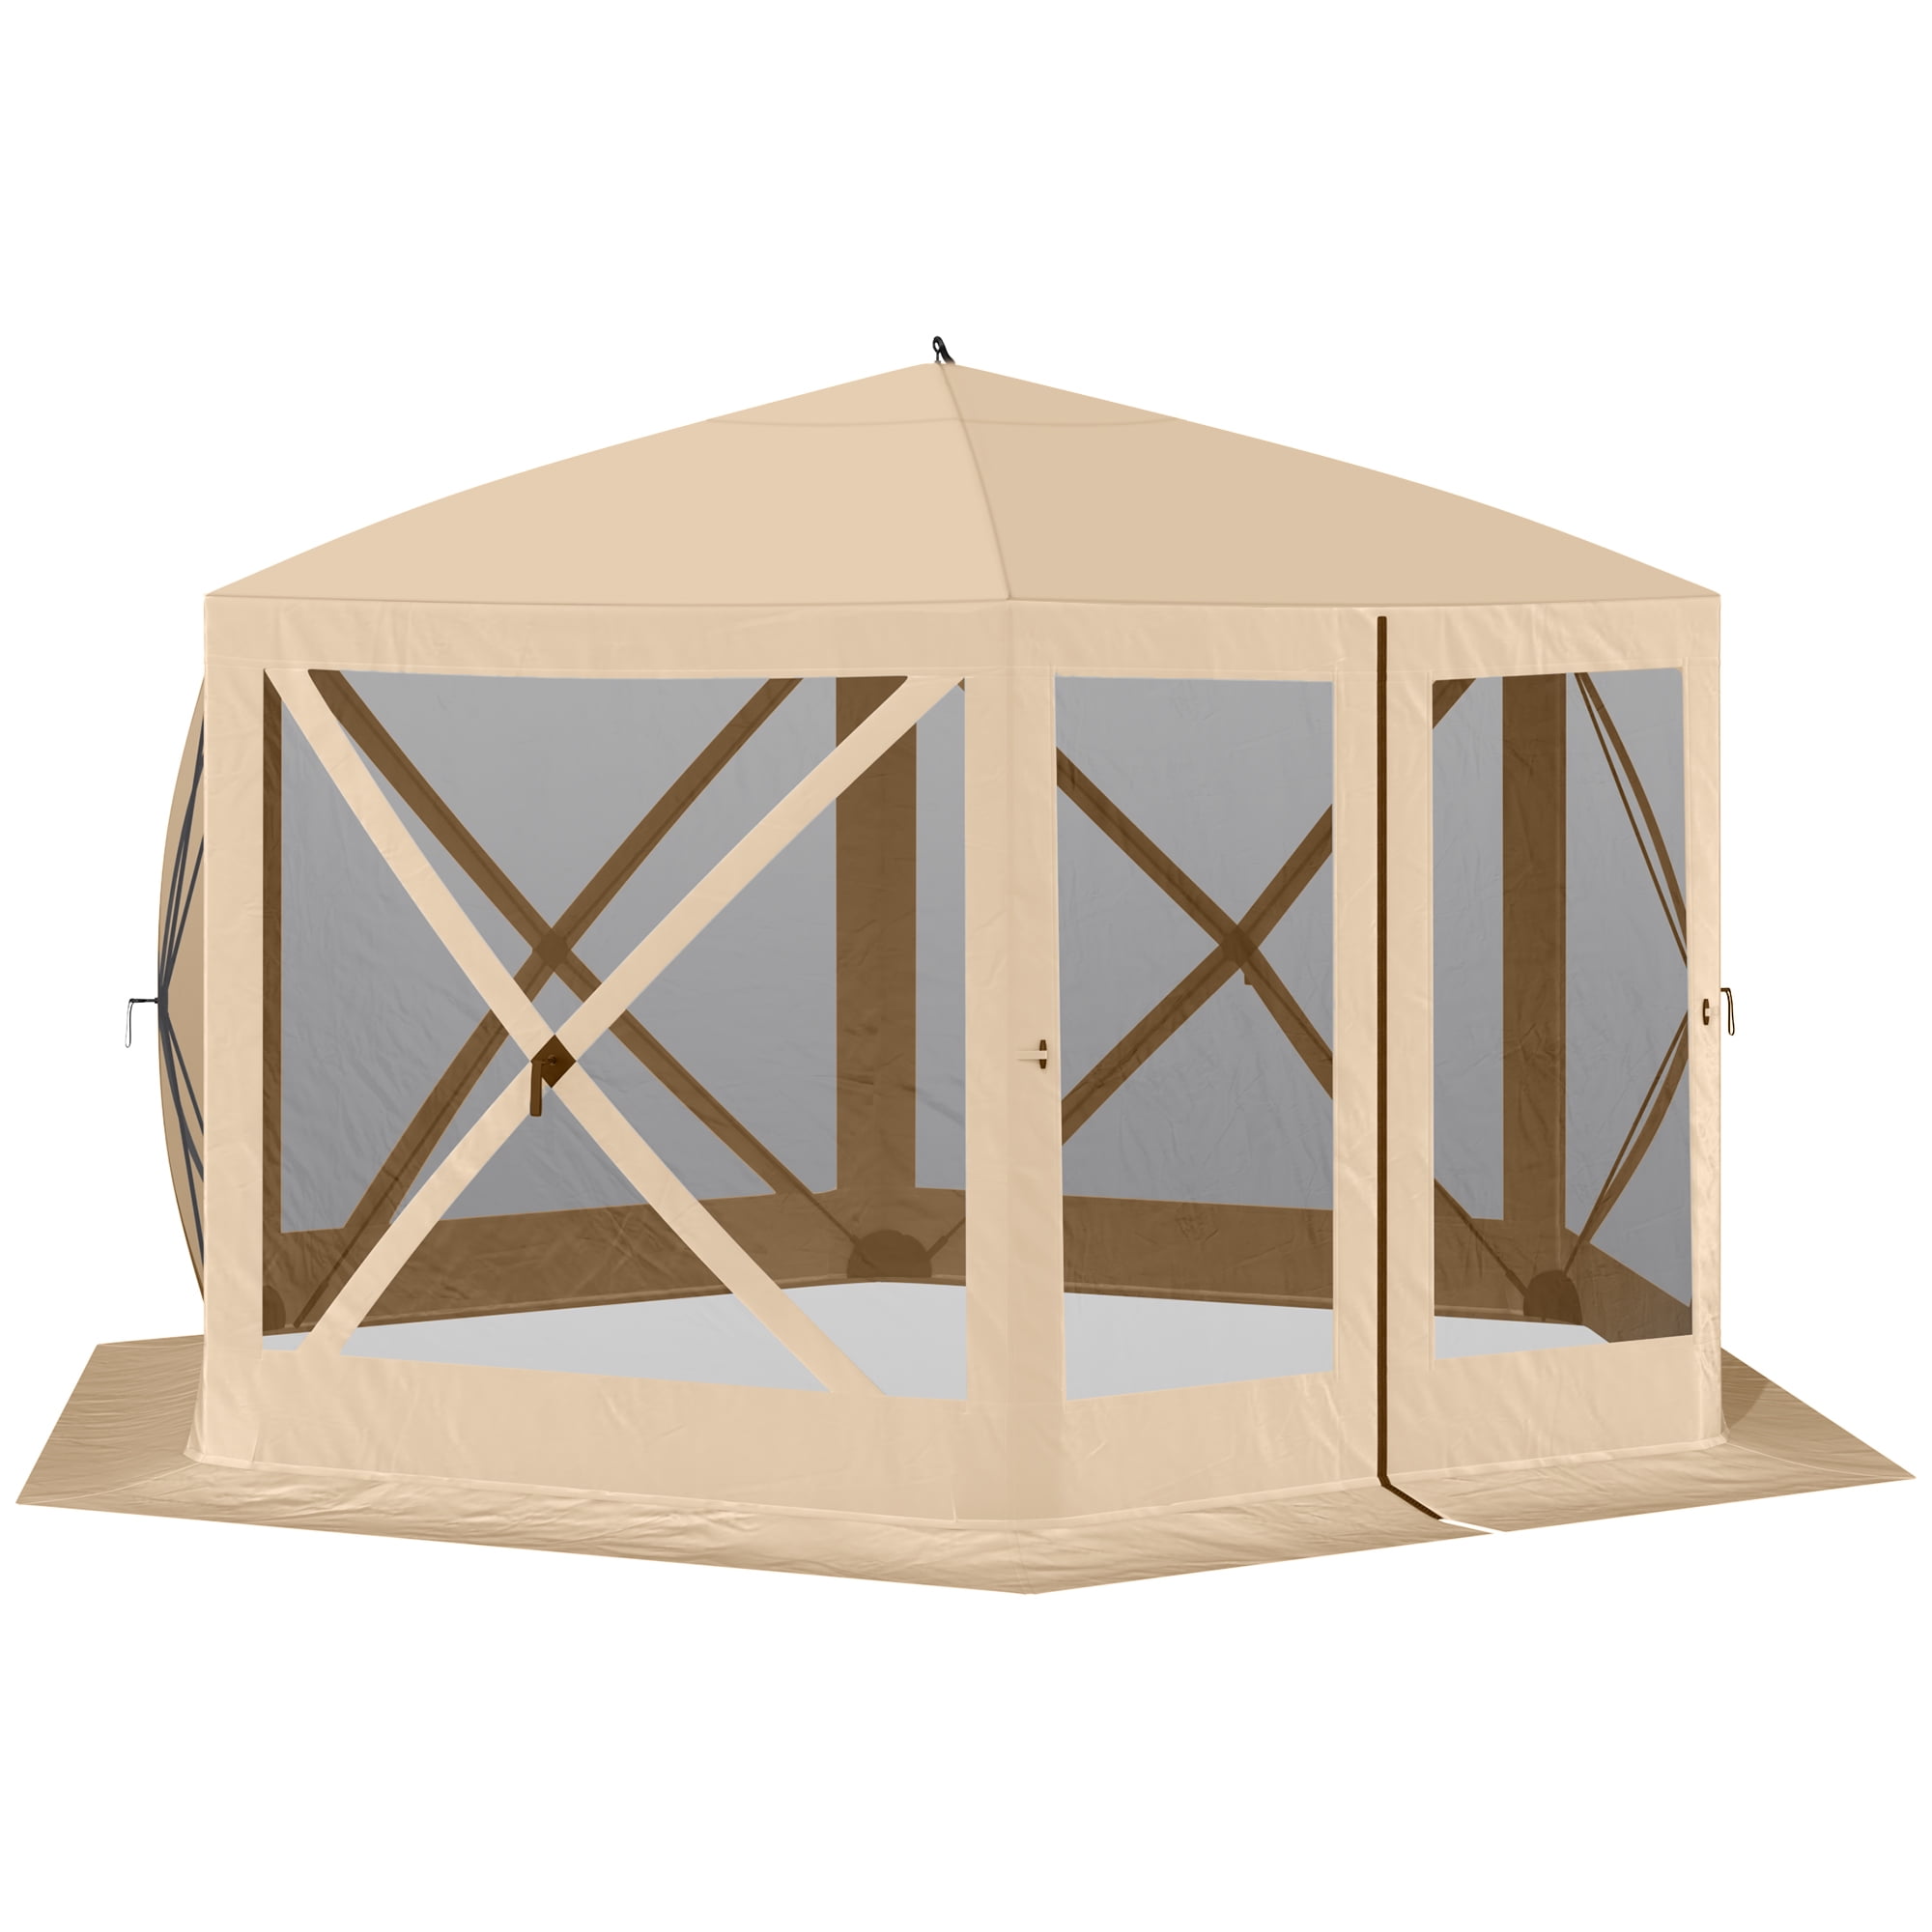 Outsunny-Hexagon-Screen-House-Pop-Up-Tent-Portable-Gazebo-Canopy-Shelter-with-Mesh-Netting-Walls-Carry-Bag-and-Shaded-Interior-12-x-12-Beige_cf82ea24-6e67-4640-9188-c4b7a374cfe6.d2d114a6e92f96c7c2aa3e107392f765.jpeg